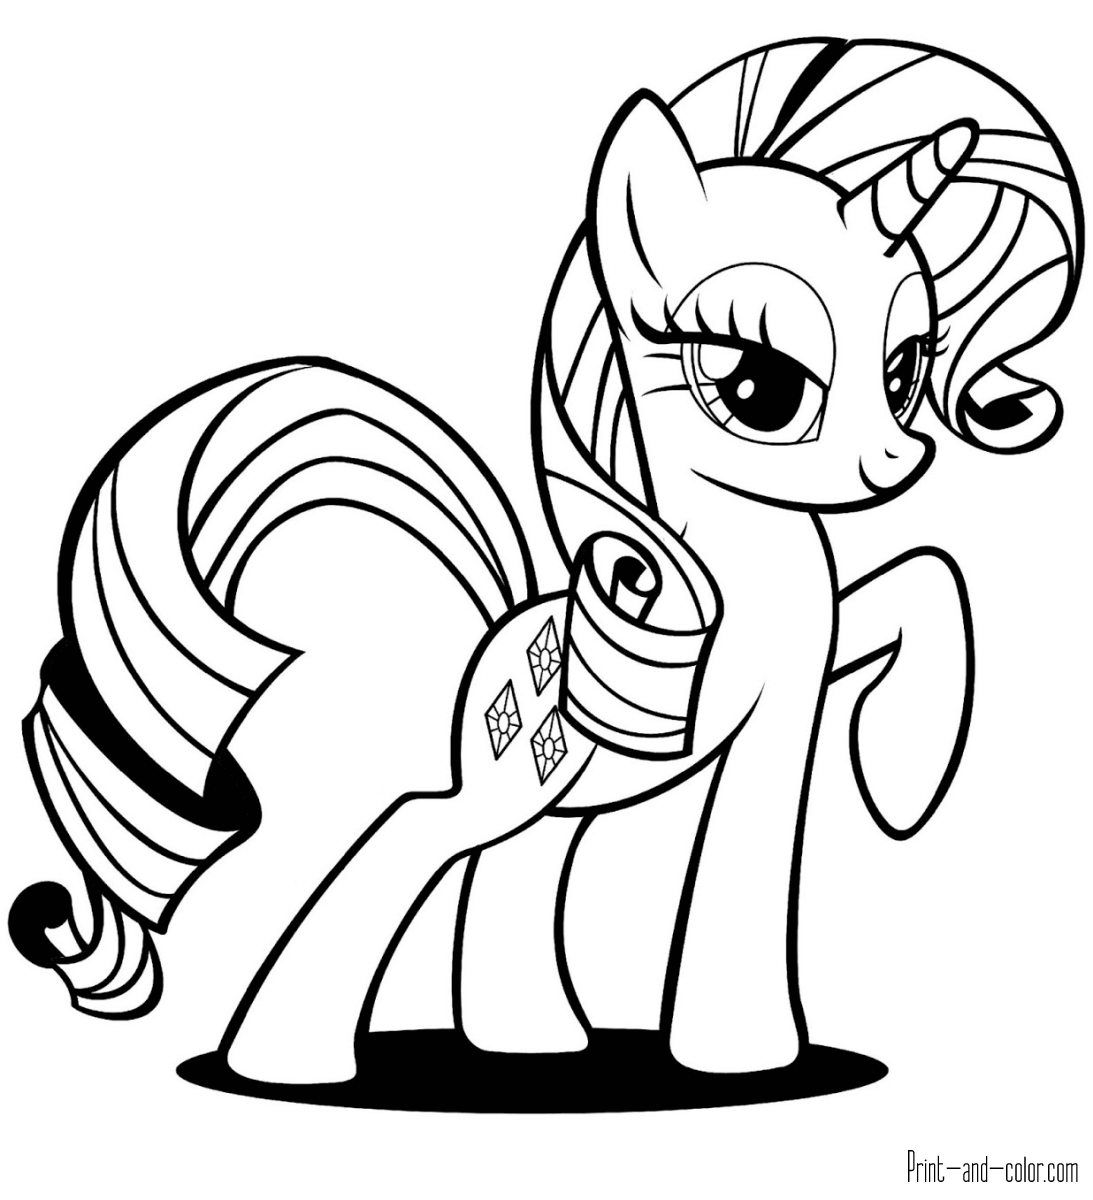 my pony coloring pages free printable my little pony coloring pages for kids coloring pony pages my 